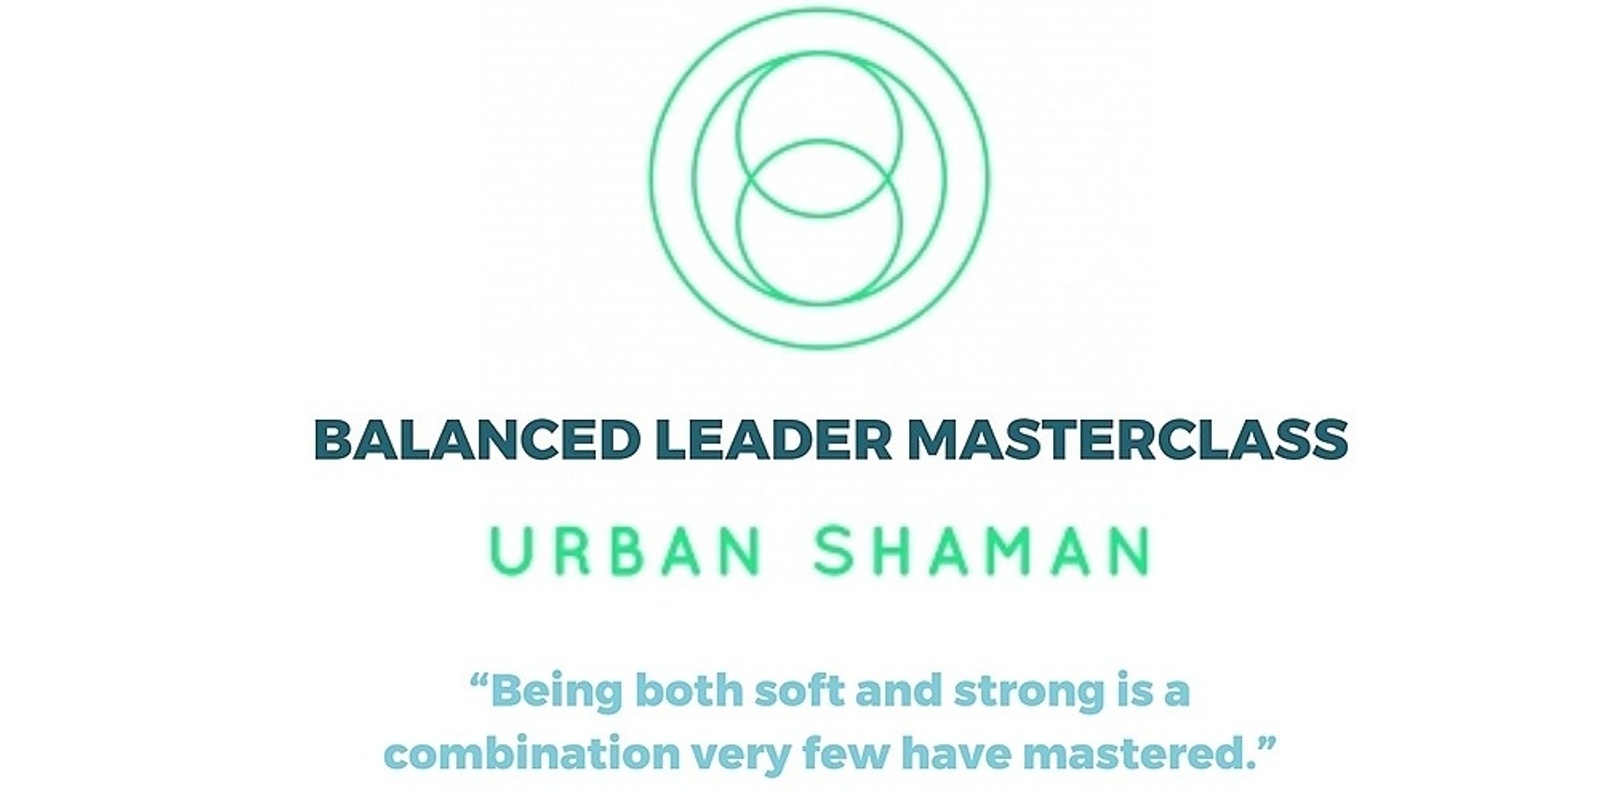 Banner image for Balanced Leader Masterclass  (It all starts with you)